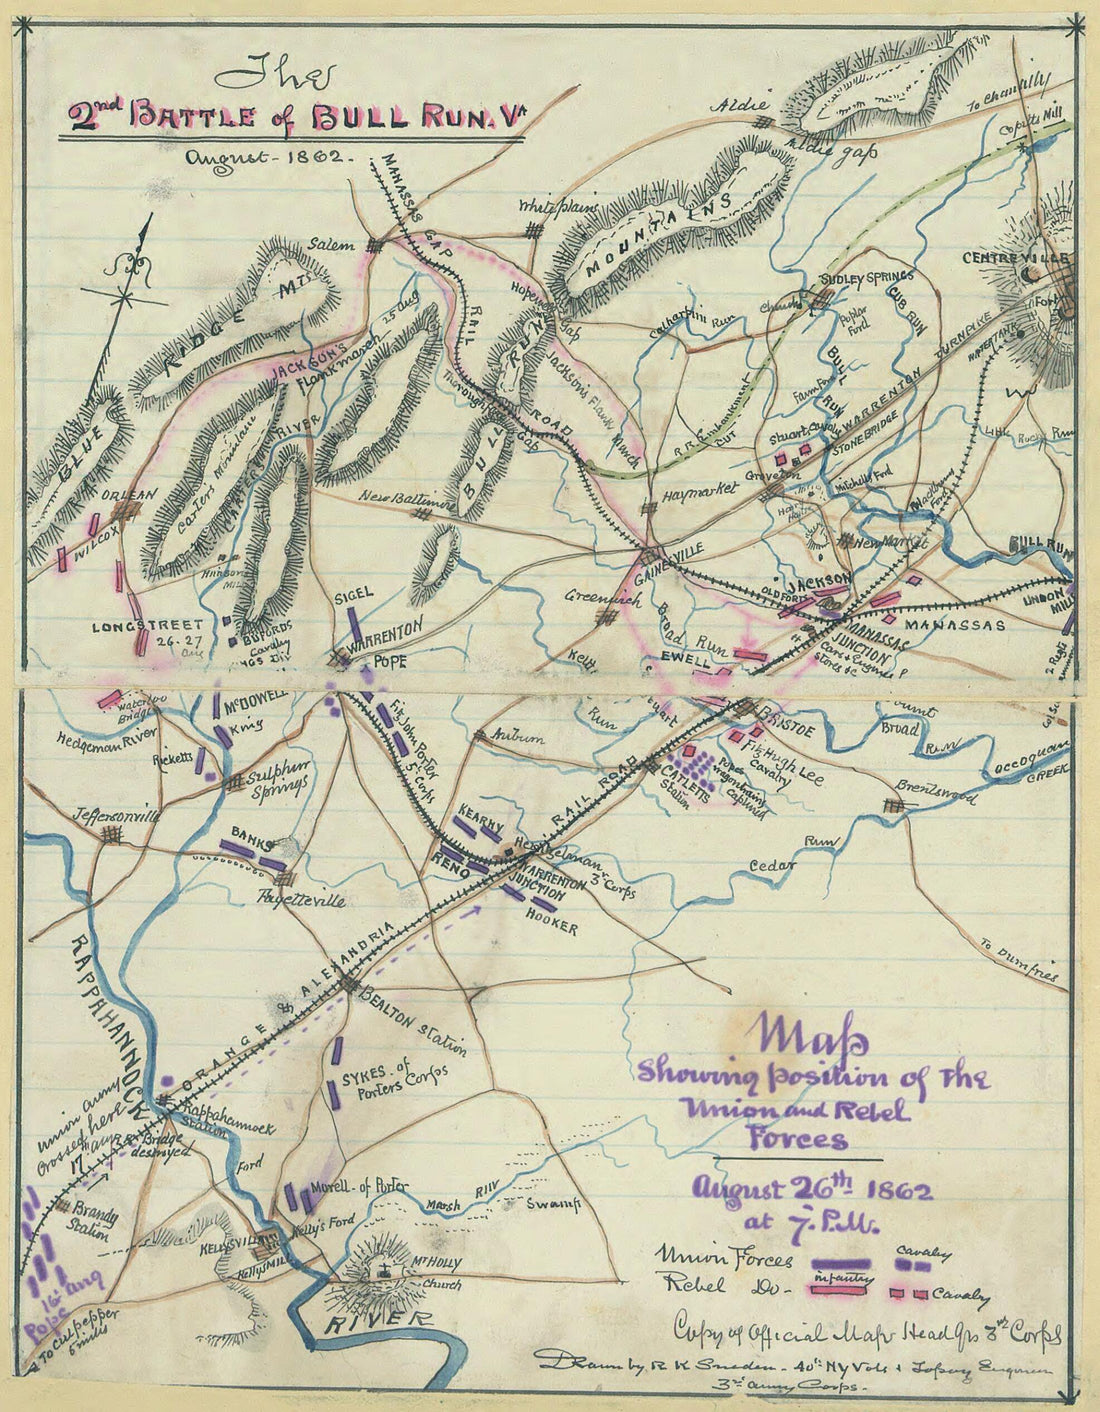 This old map of The 2nd Battle of Bull Run, Va., August 1862. Map Showing Position of the Union and Rebel Forces, August 26th, 1862 at 7 P.m from 08-26 was created by Robert Knox Sneden in 08-26